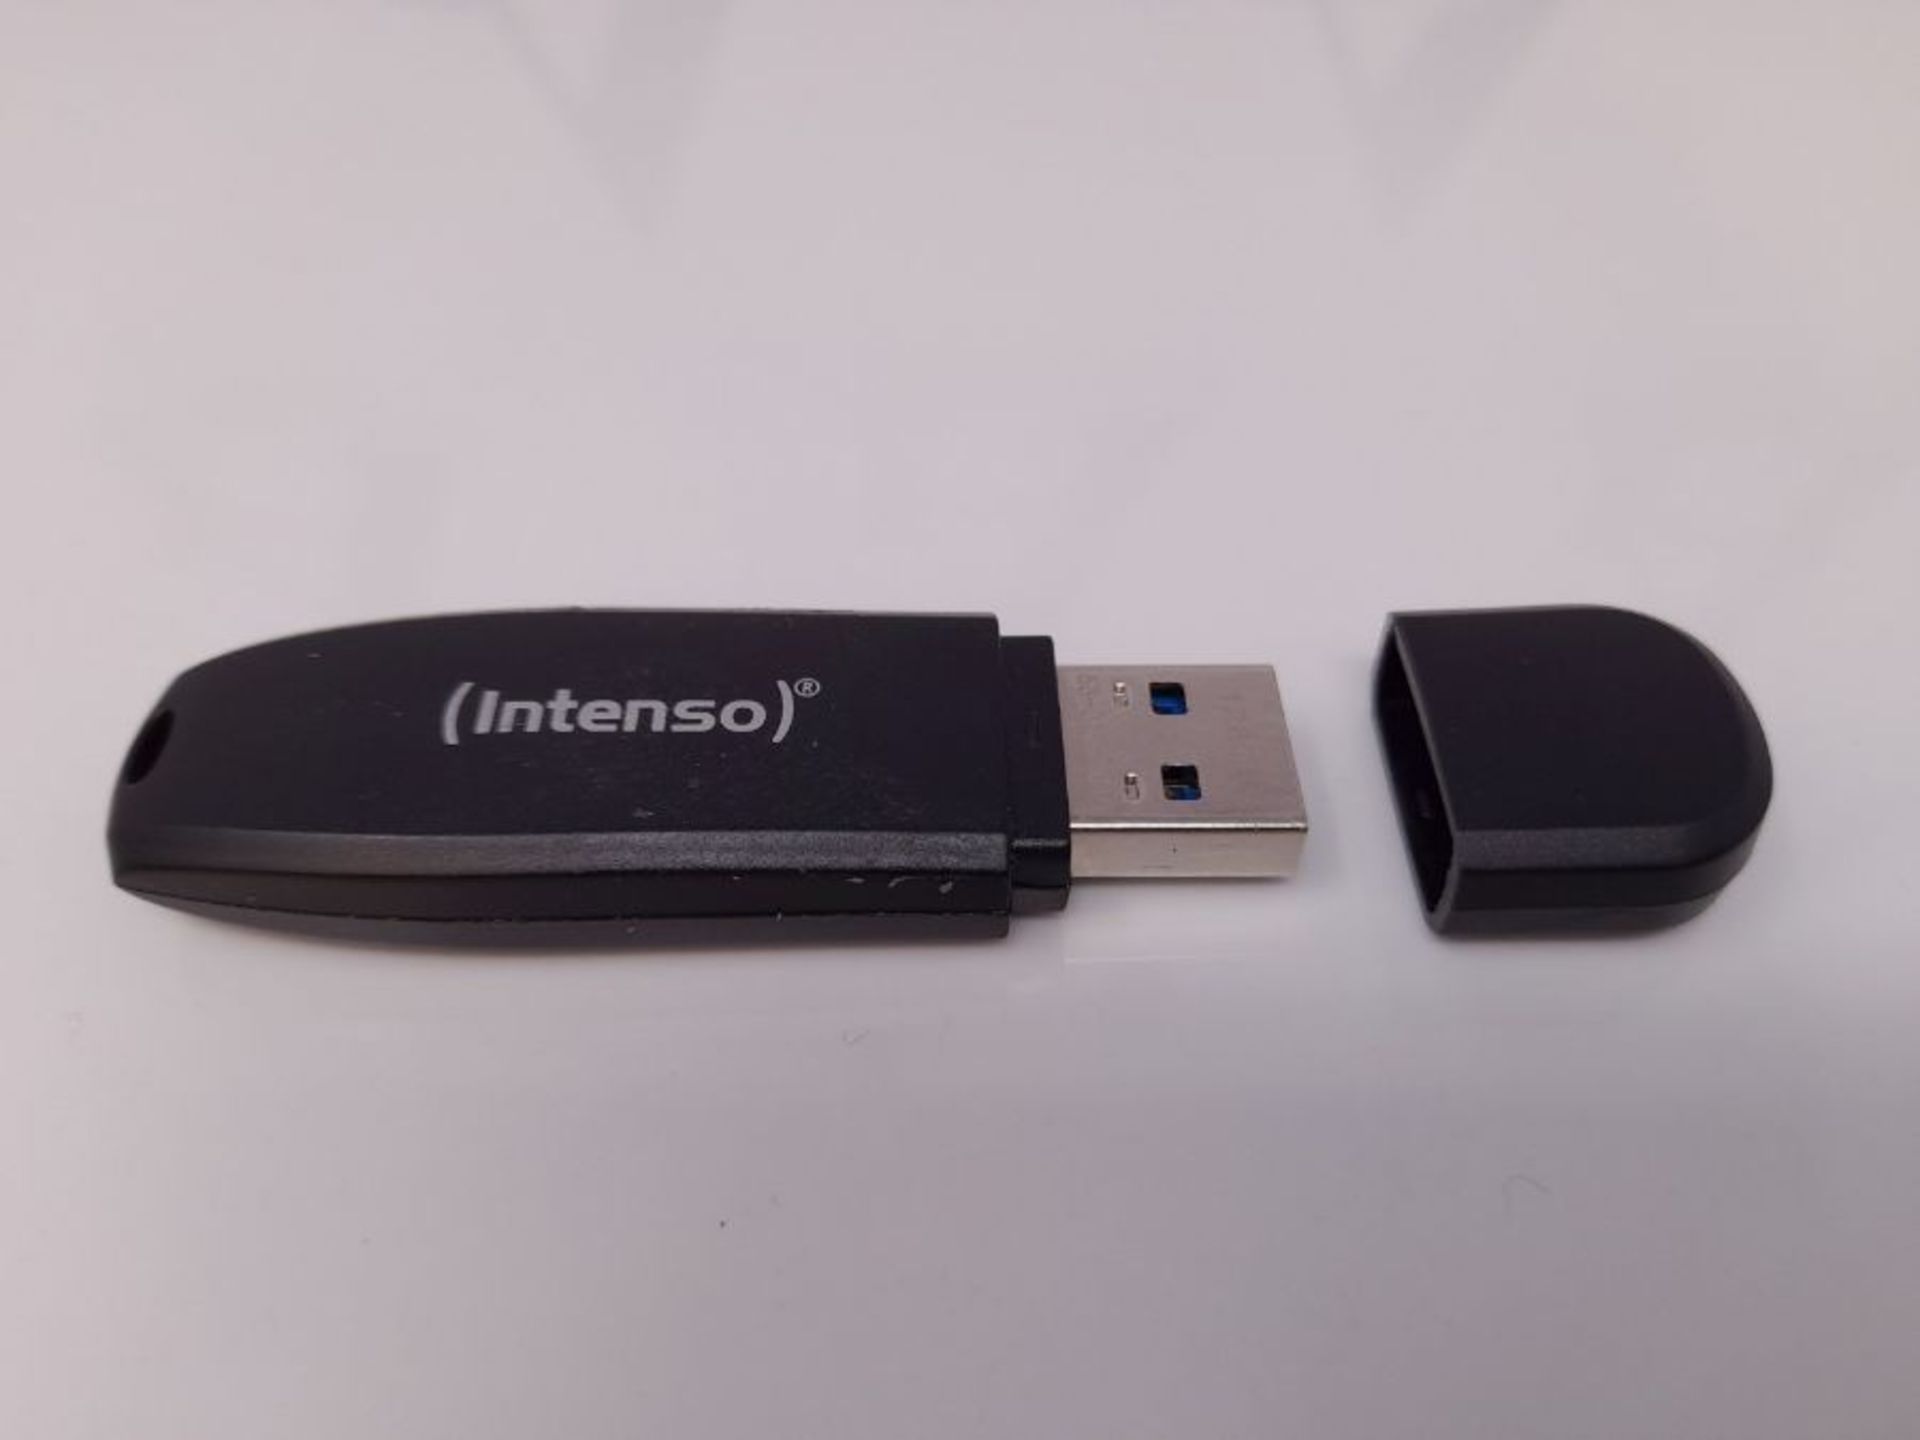 Intenso Speed LINE USB 3.0 3533491 Drive - Image 2 of 3